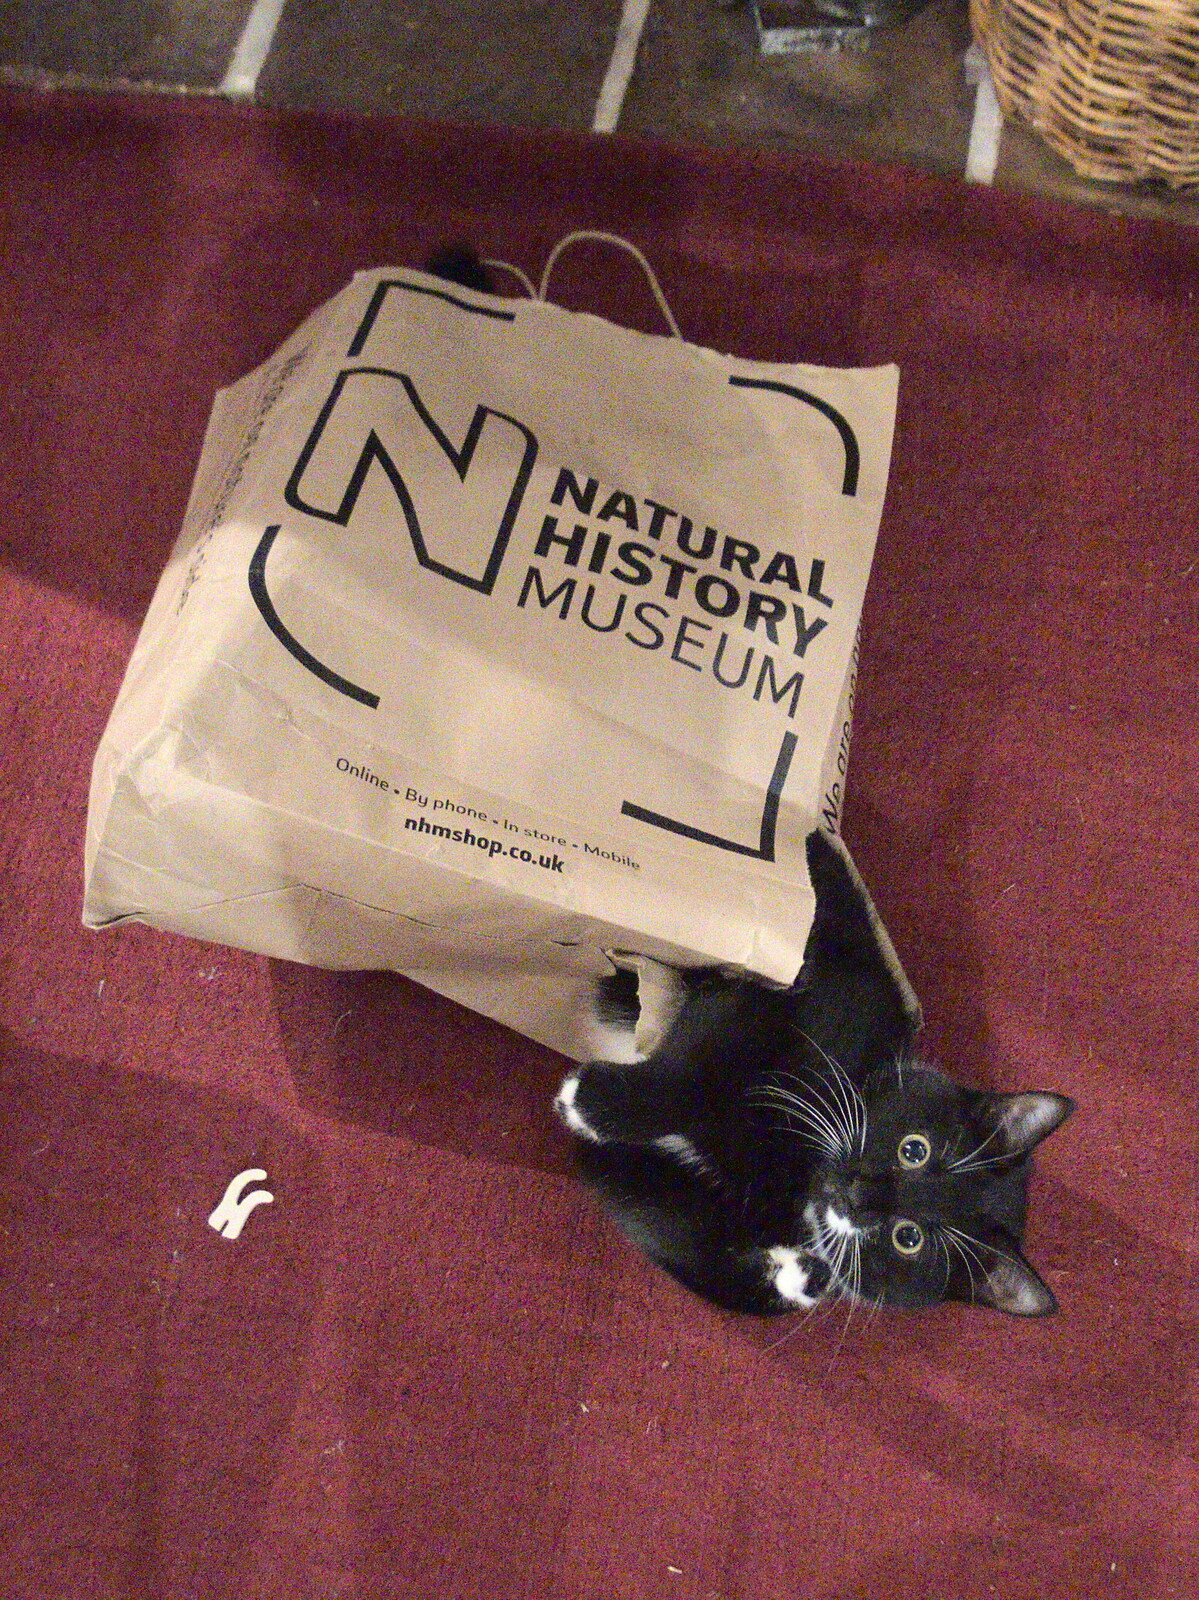 Lucy Kitten bursts out of a paper bag from Supercharged Electrons and Pizza at the Village Hall, Brome, Suffolk - 23rd January 2022